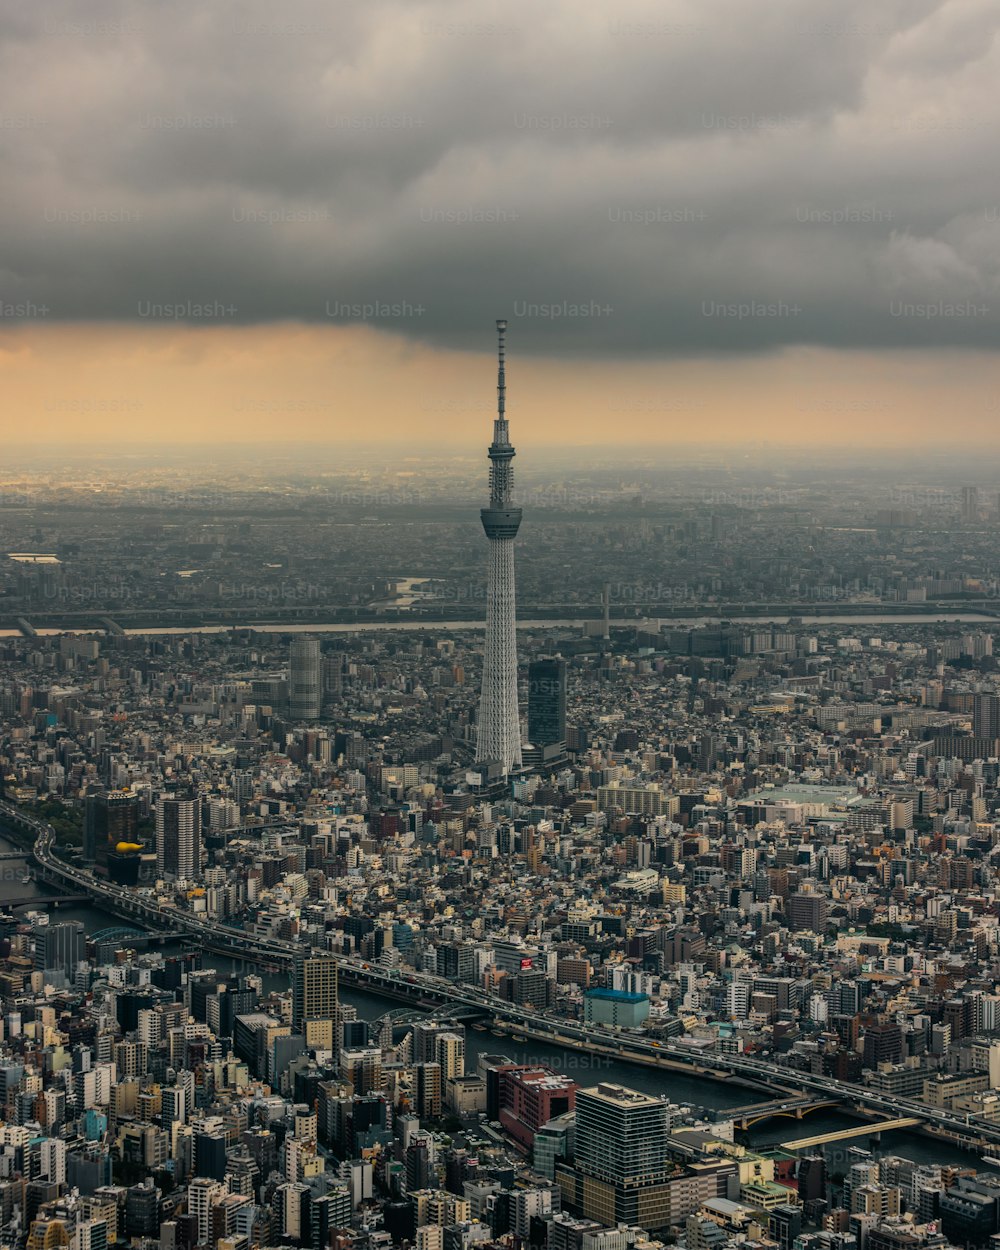 a very tall tower towering over a city under a cloudy sky